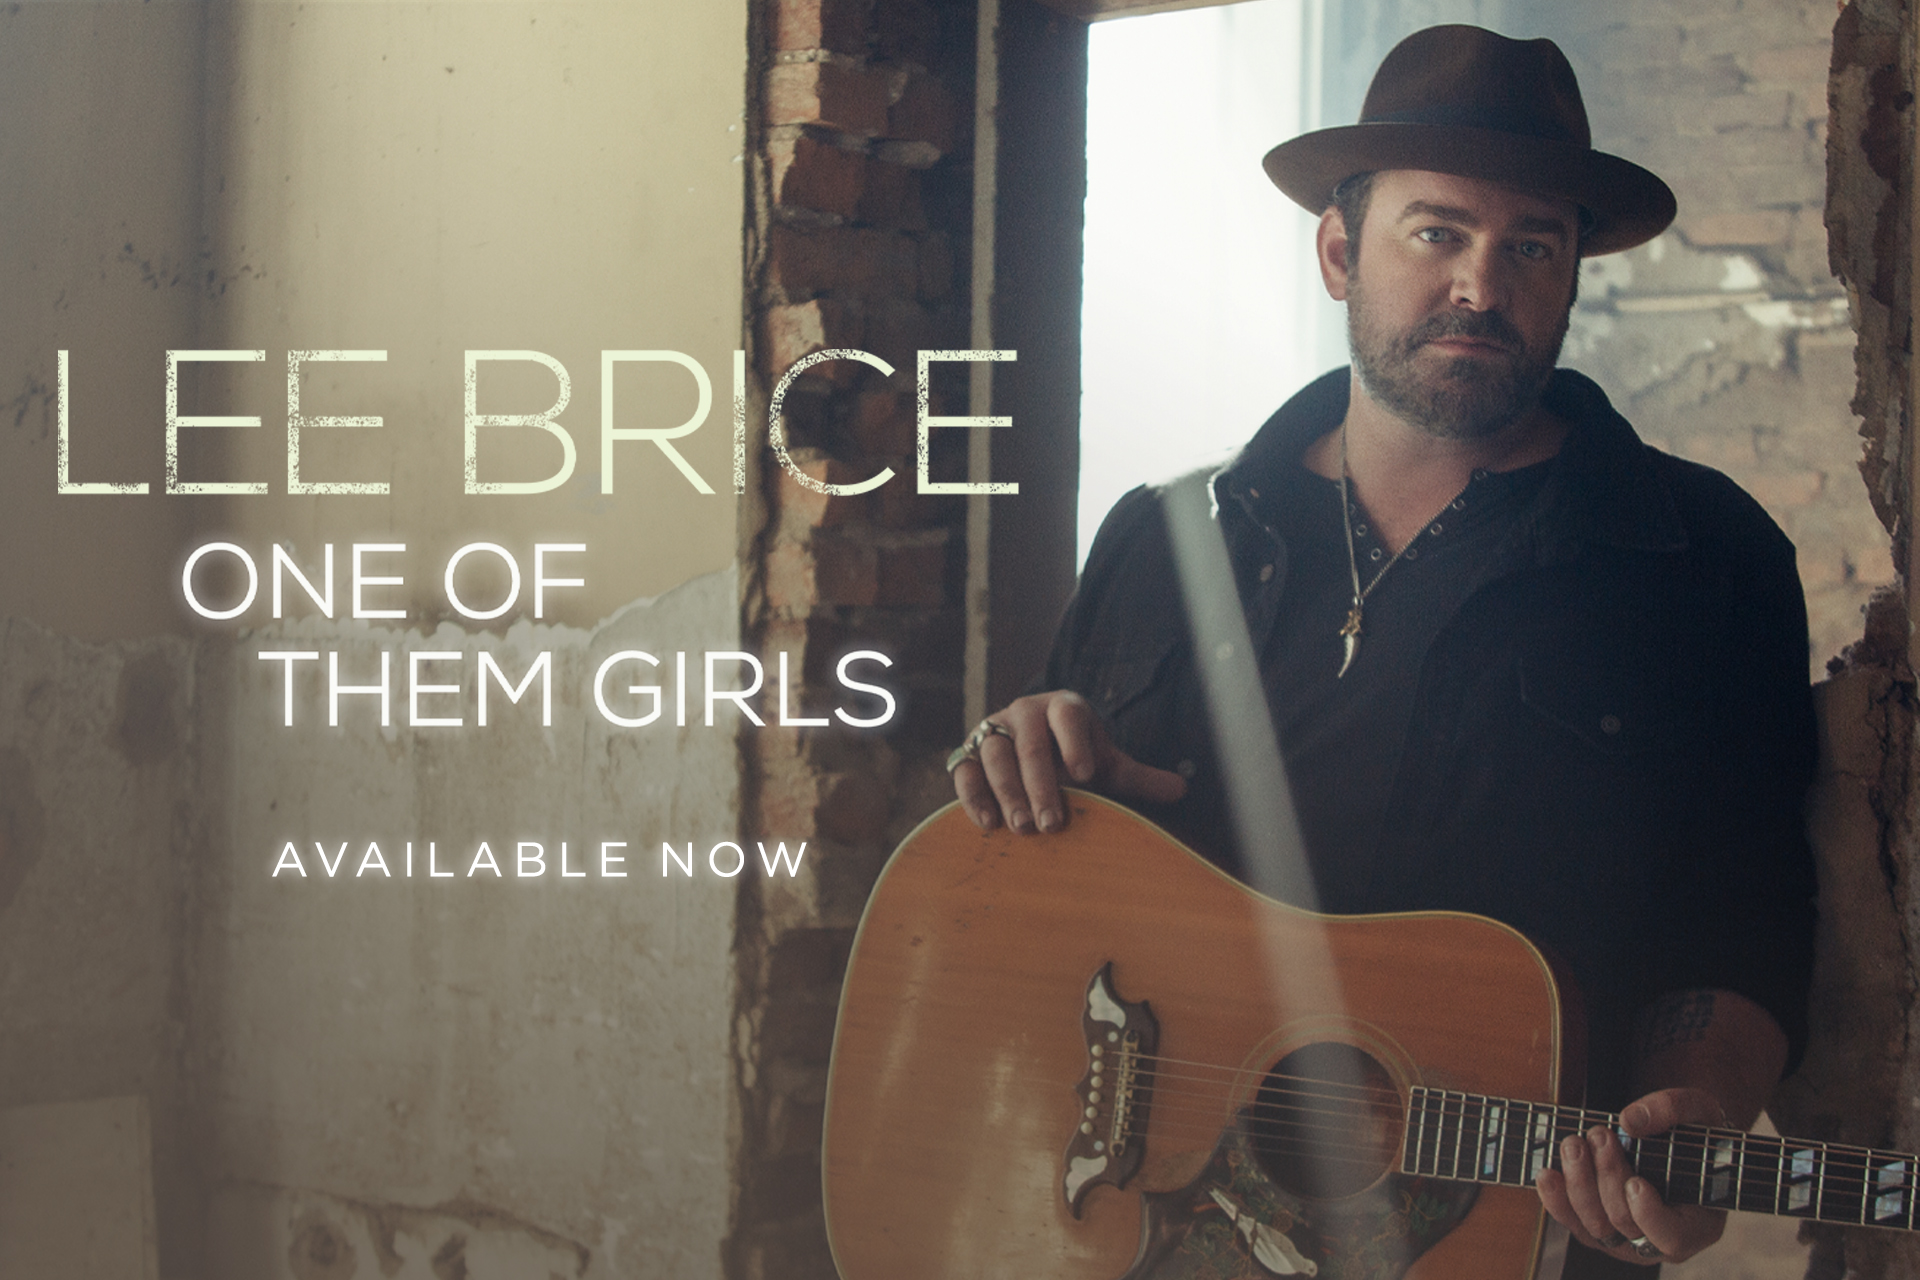 Curb Records' Lee Brice Releases New Song/Single “One of Them Girls” Today  – Curb | Word Entertainment